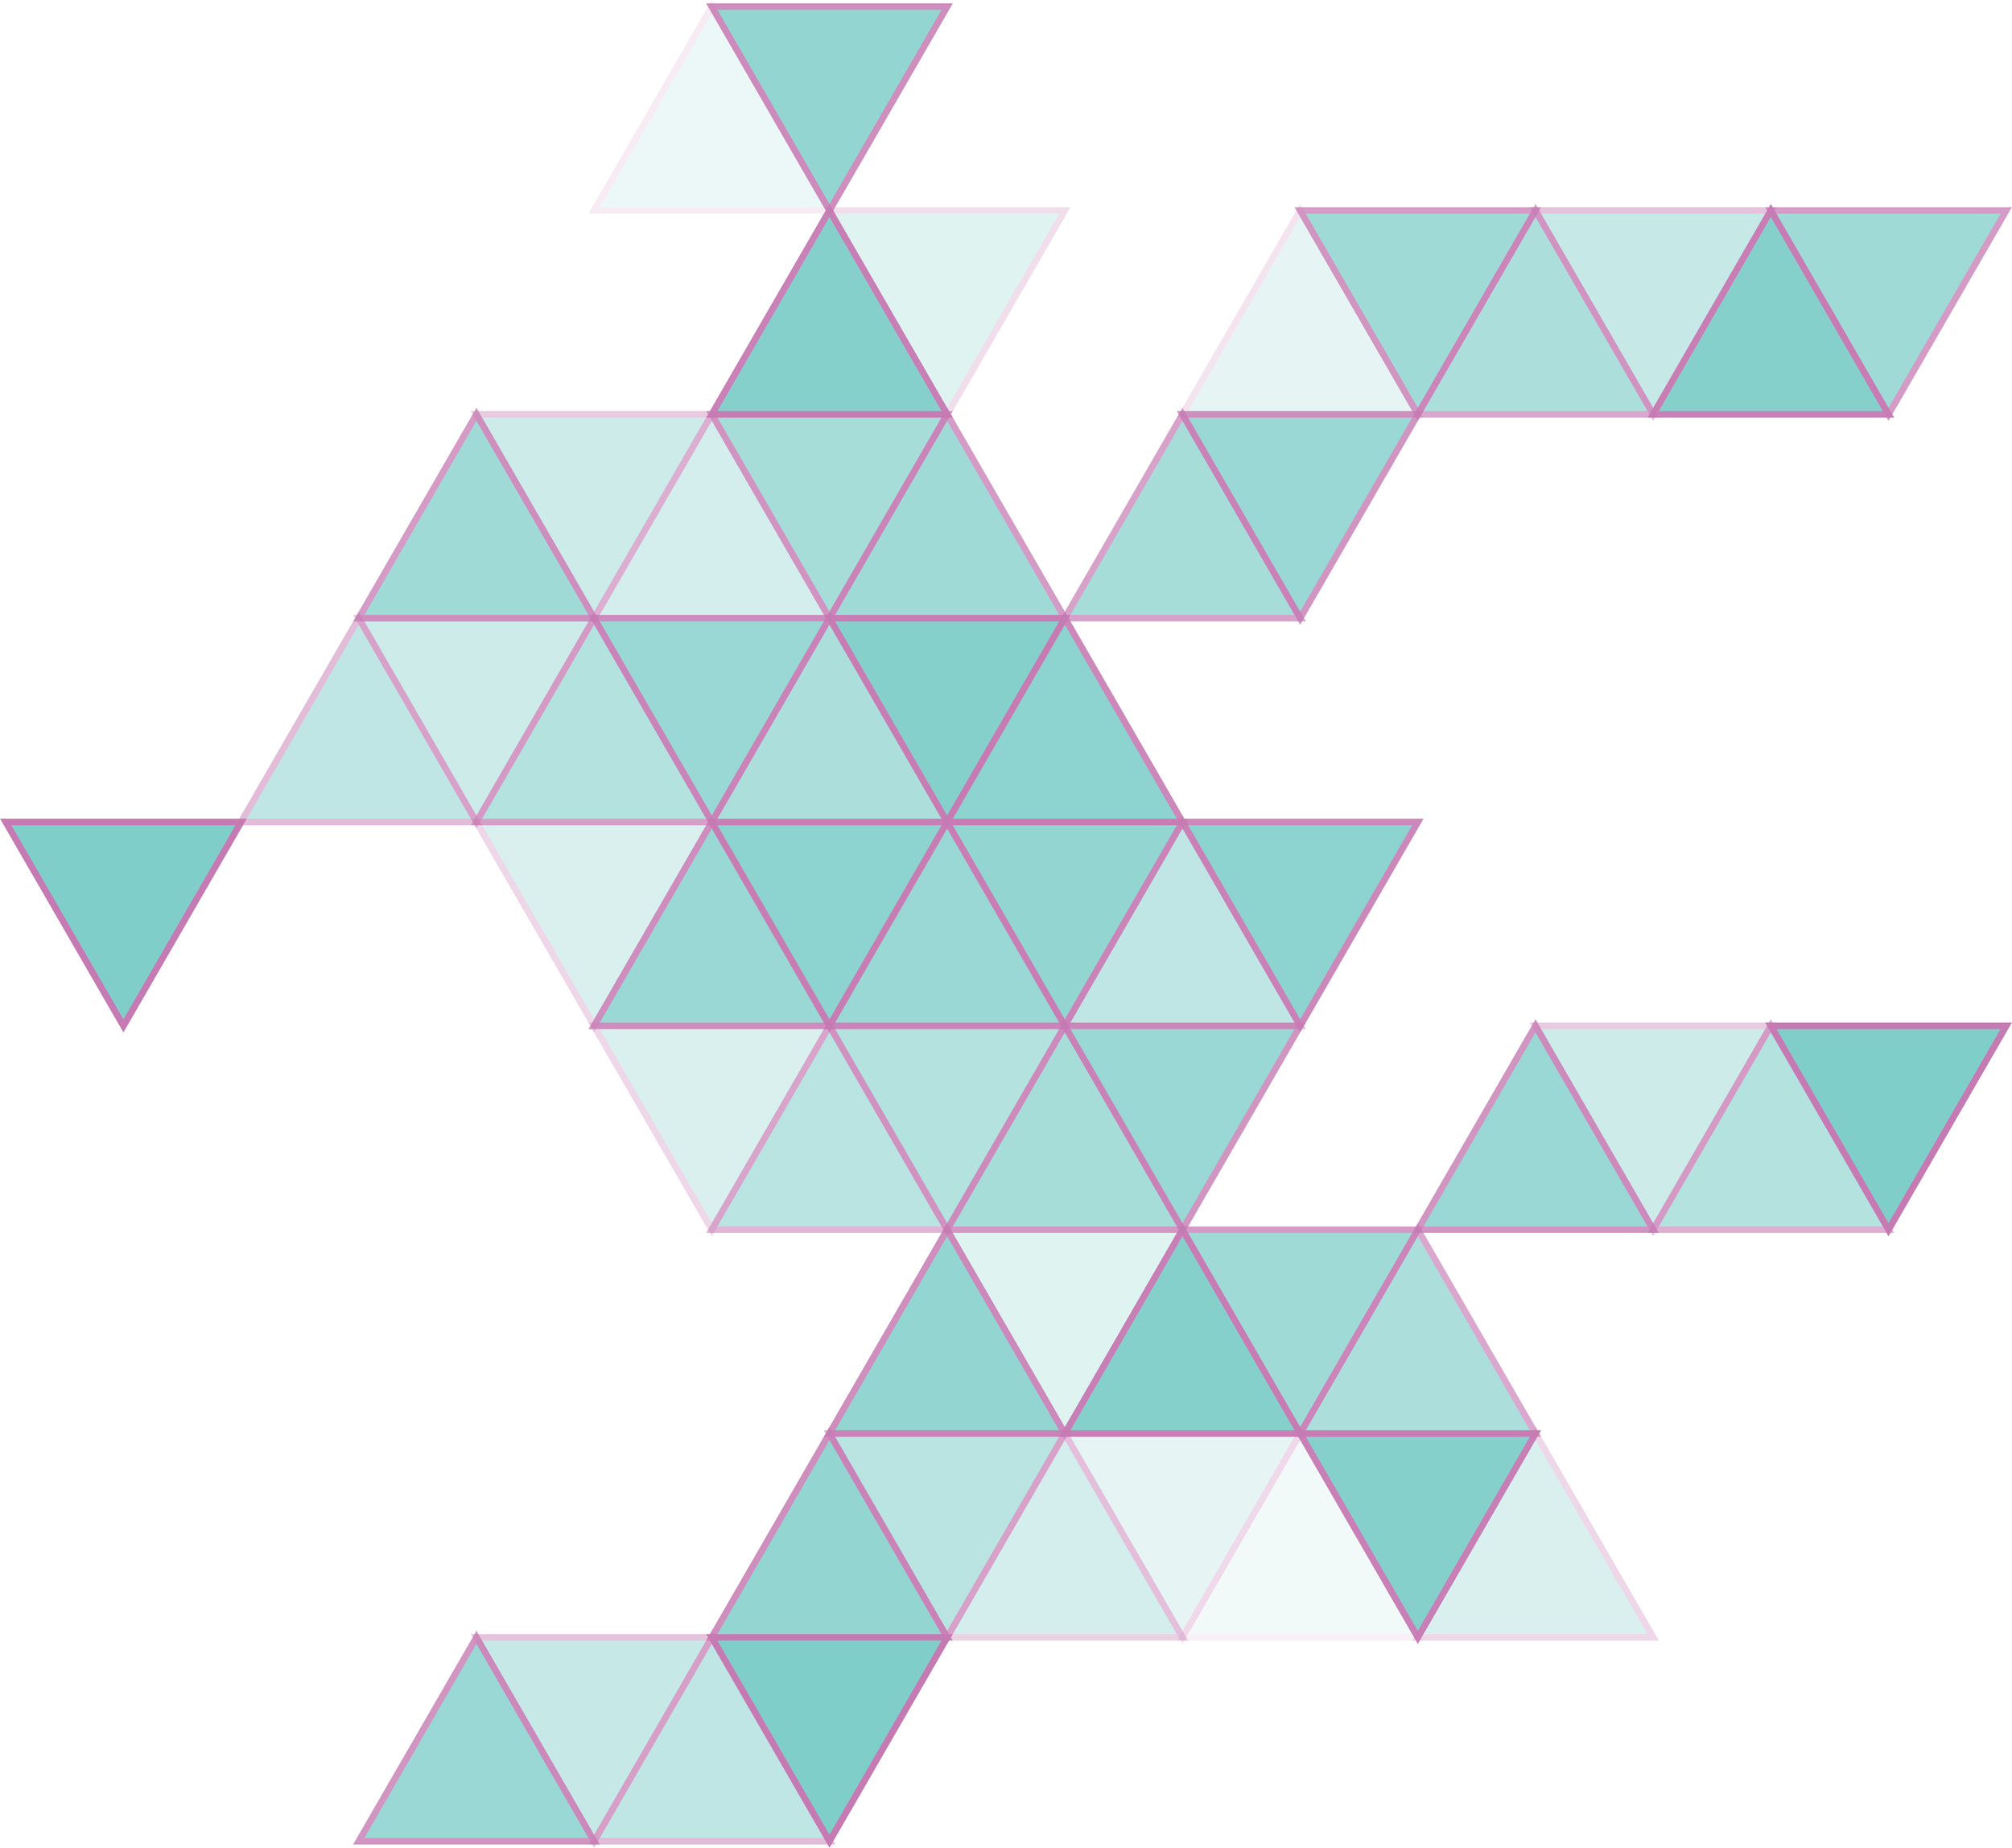 2017.11.20 triangles 2.png